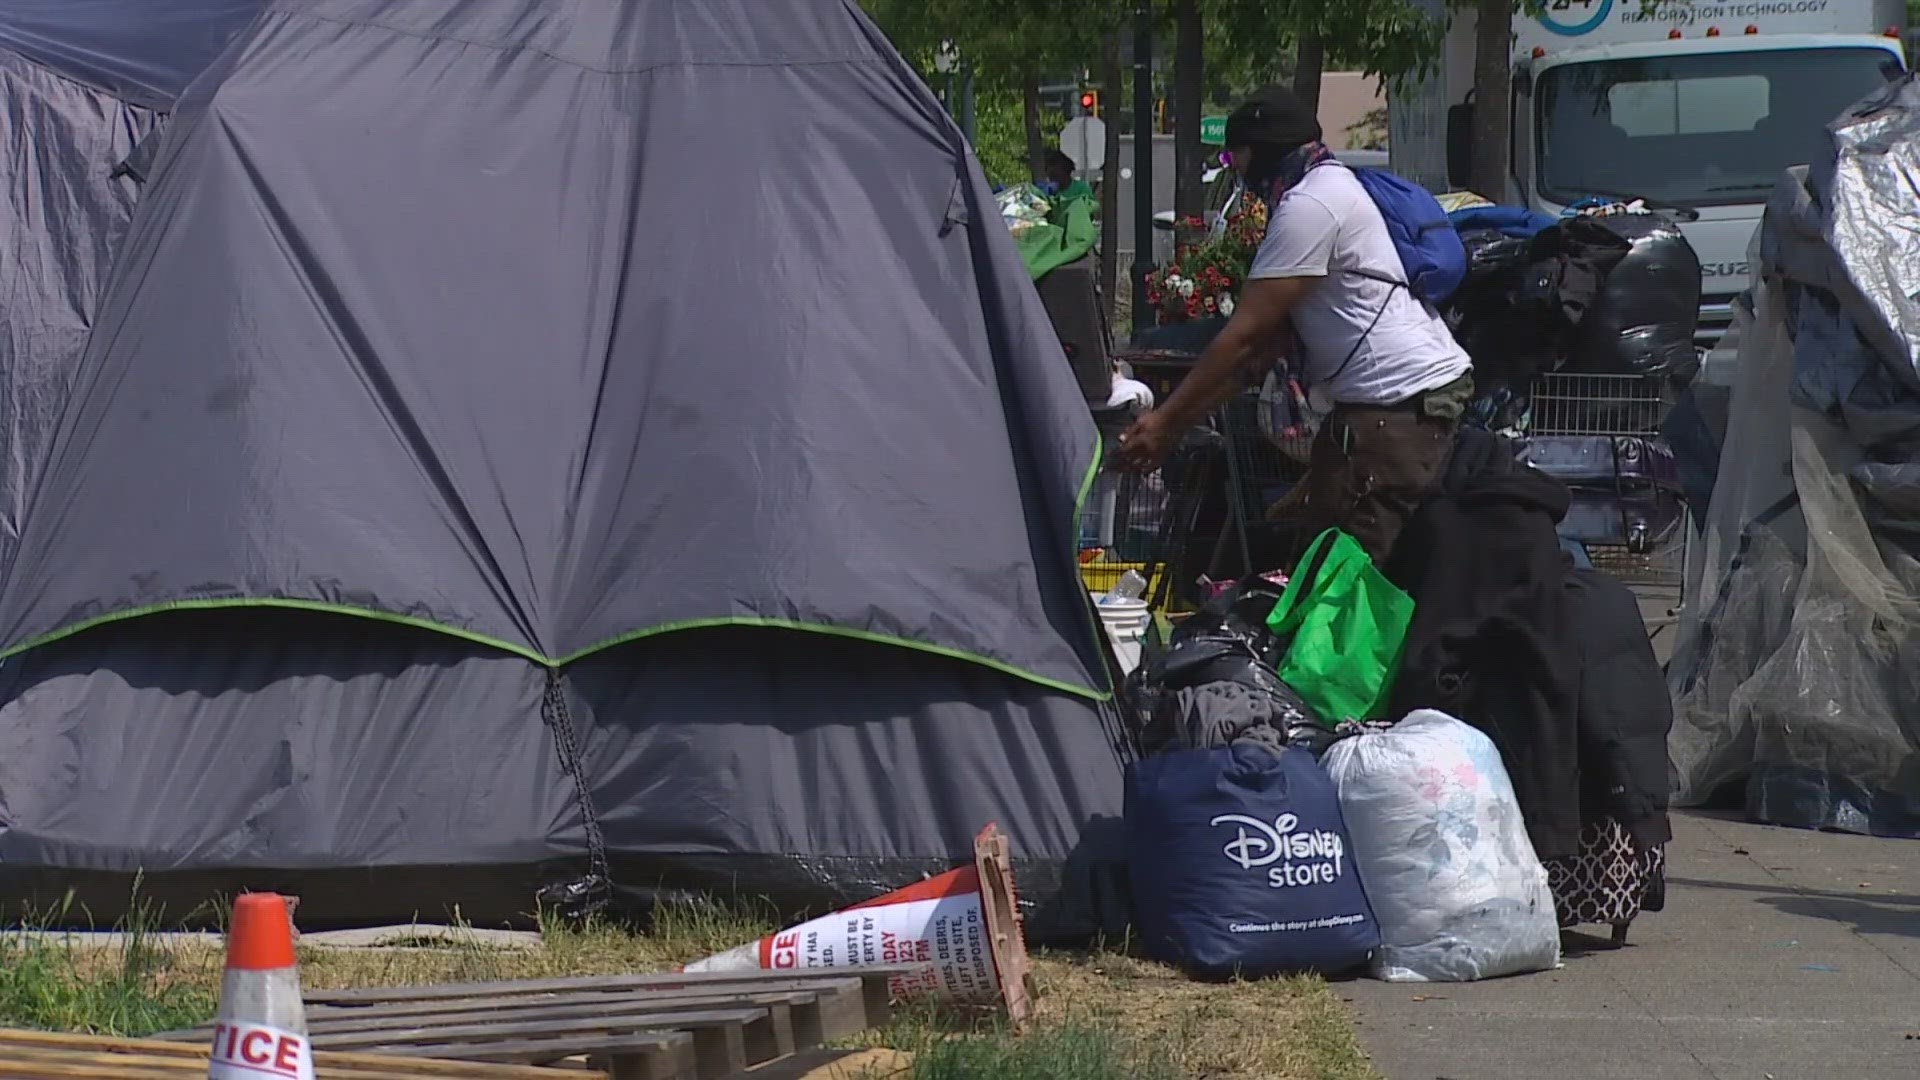 Burien is one of the cities where tensions have been rising unsanctioned encampment took because of an unsanctioned encampment that is blocks away from City Hall.